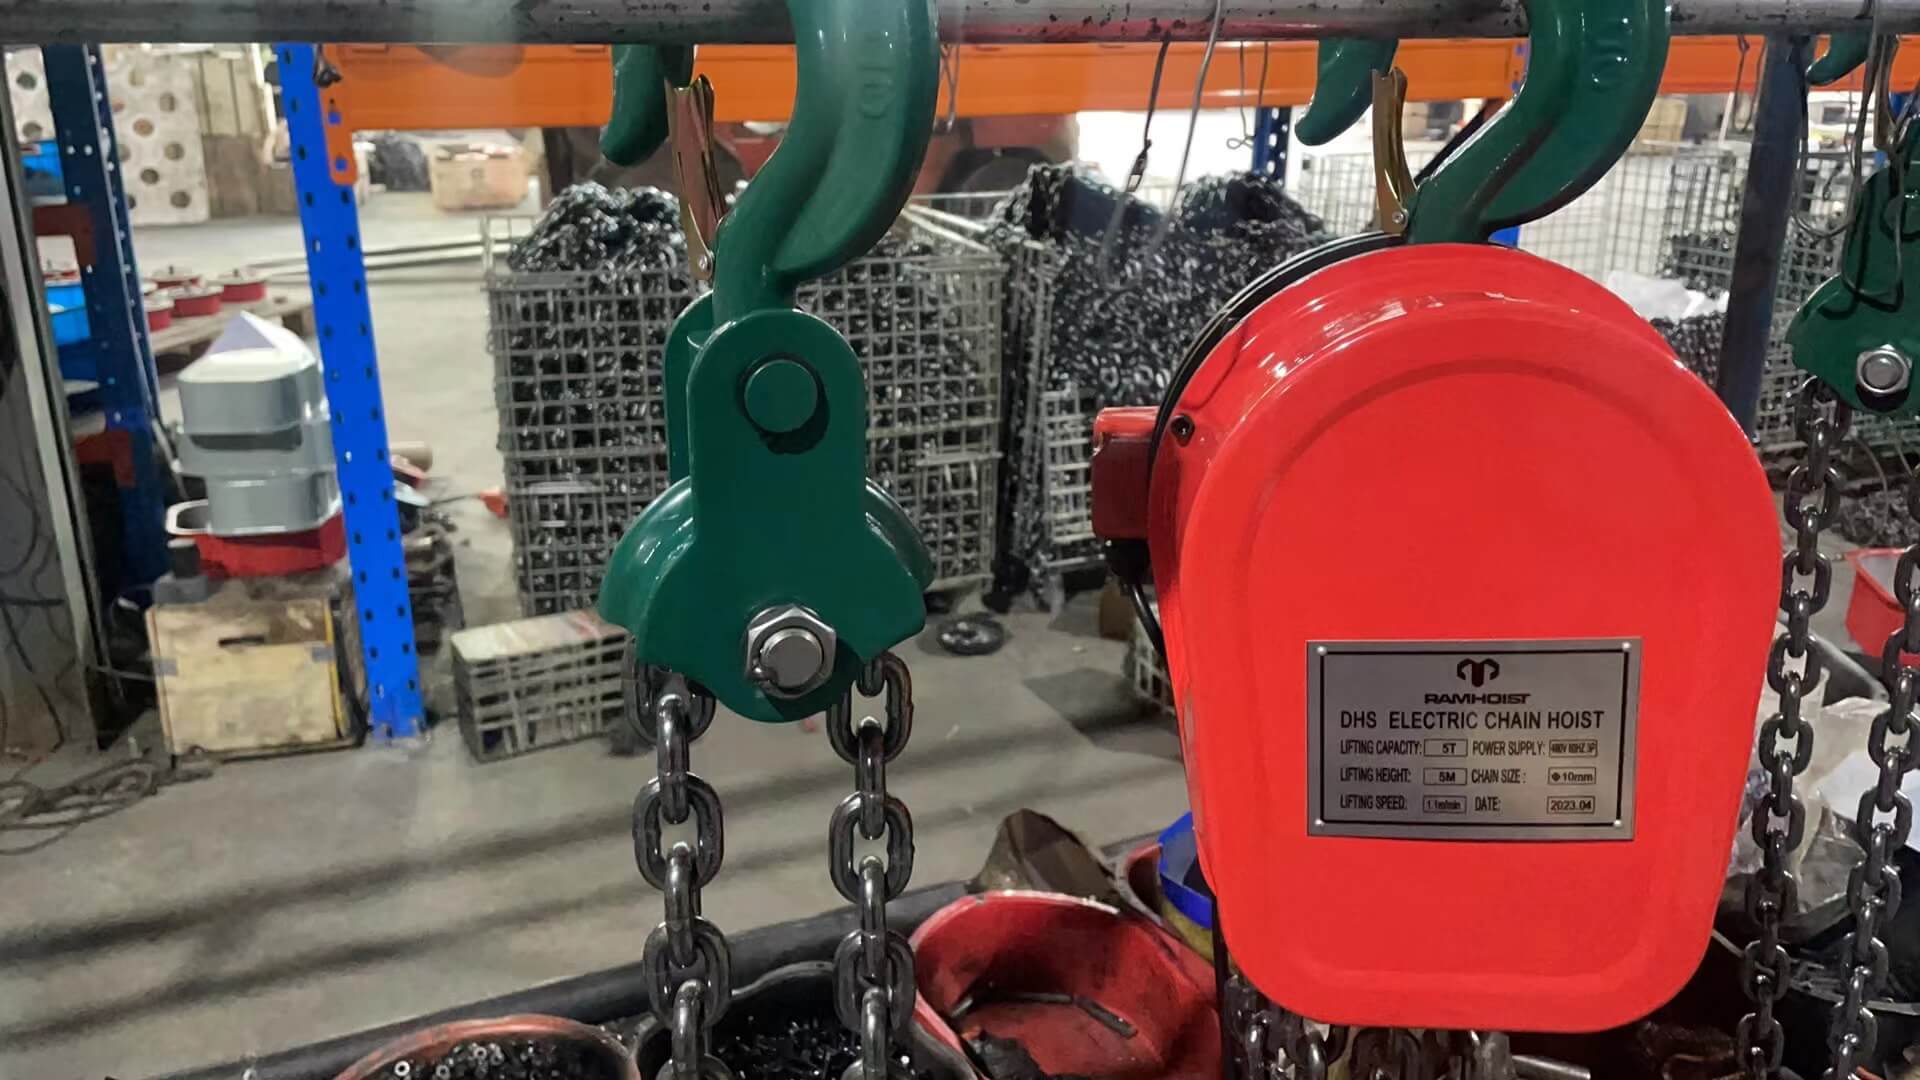 Site photos of 3T and 5T 480V DHS electric chain hoists for U.S.-2.jpg